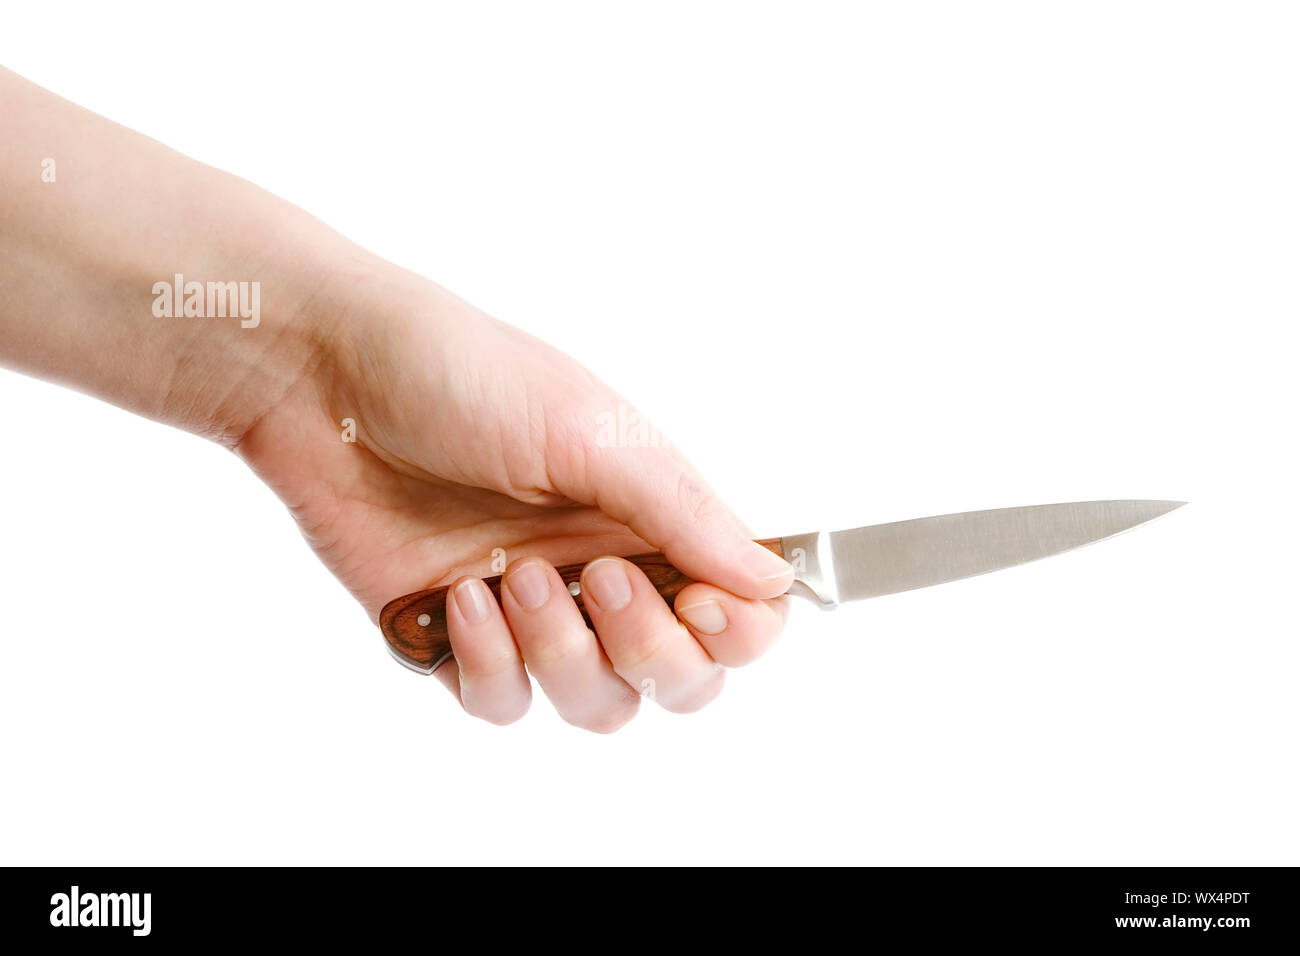 A small pearing knife in a female hand, ready to cut something.  Isolated on white with clipping path. Stock Photo